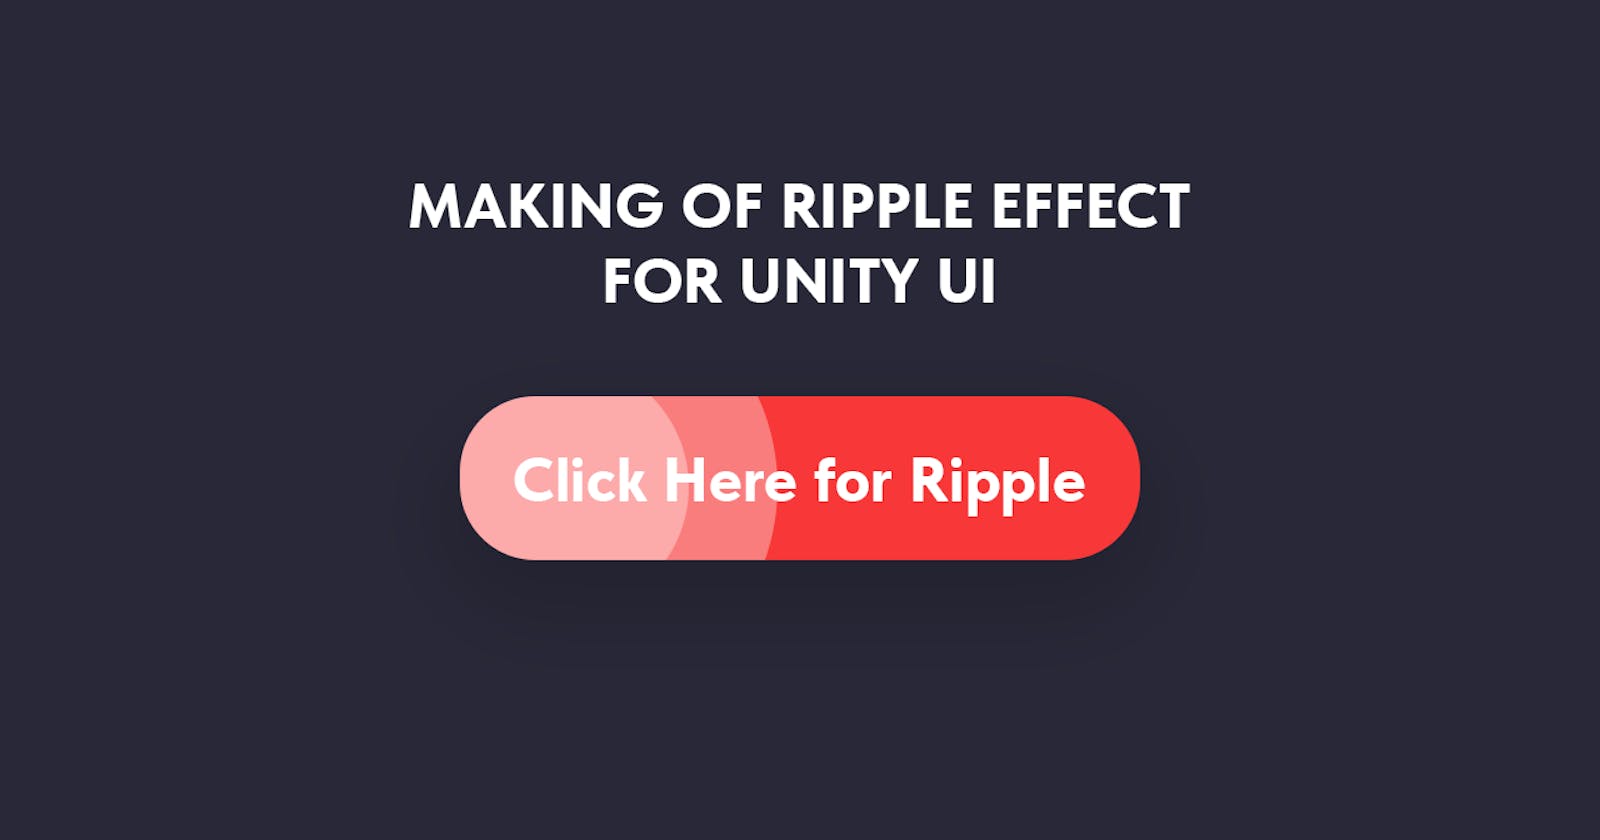 Creating of wave / ripple effect for buttons like in Material Design in Unity